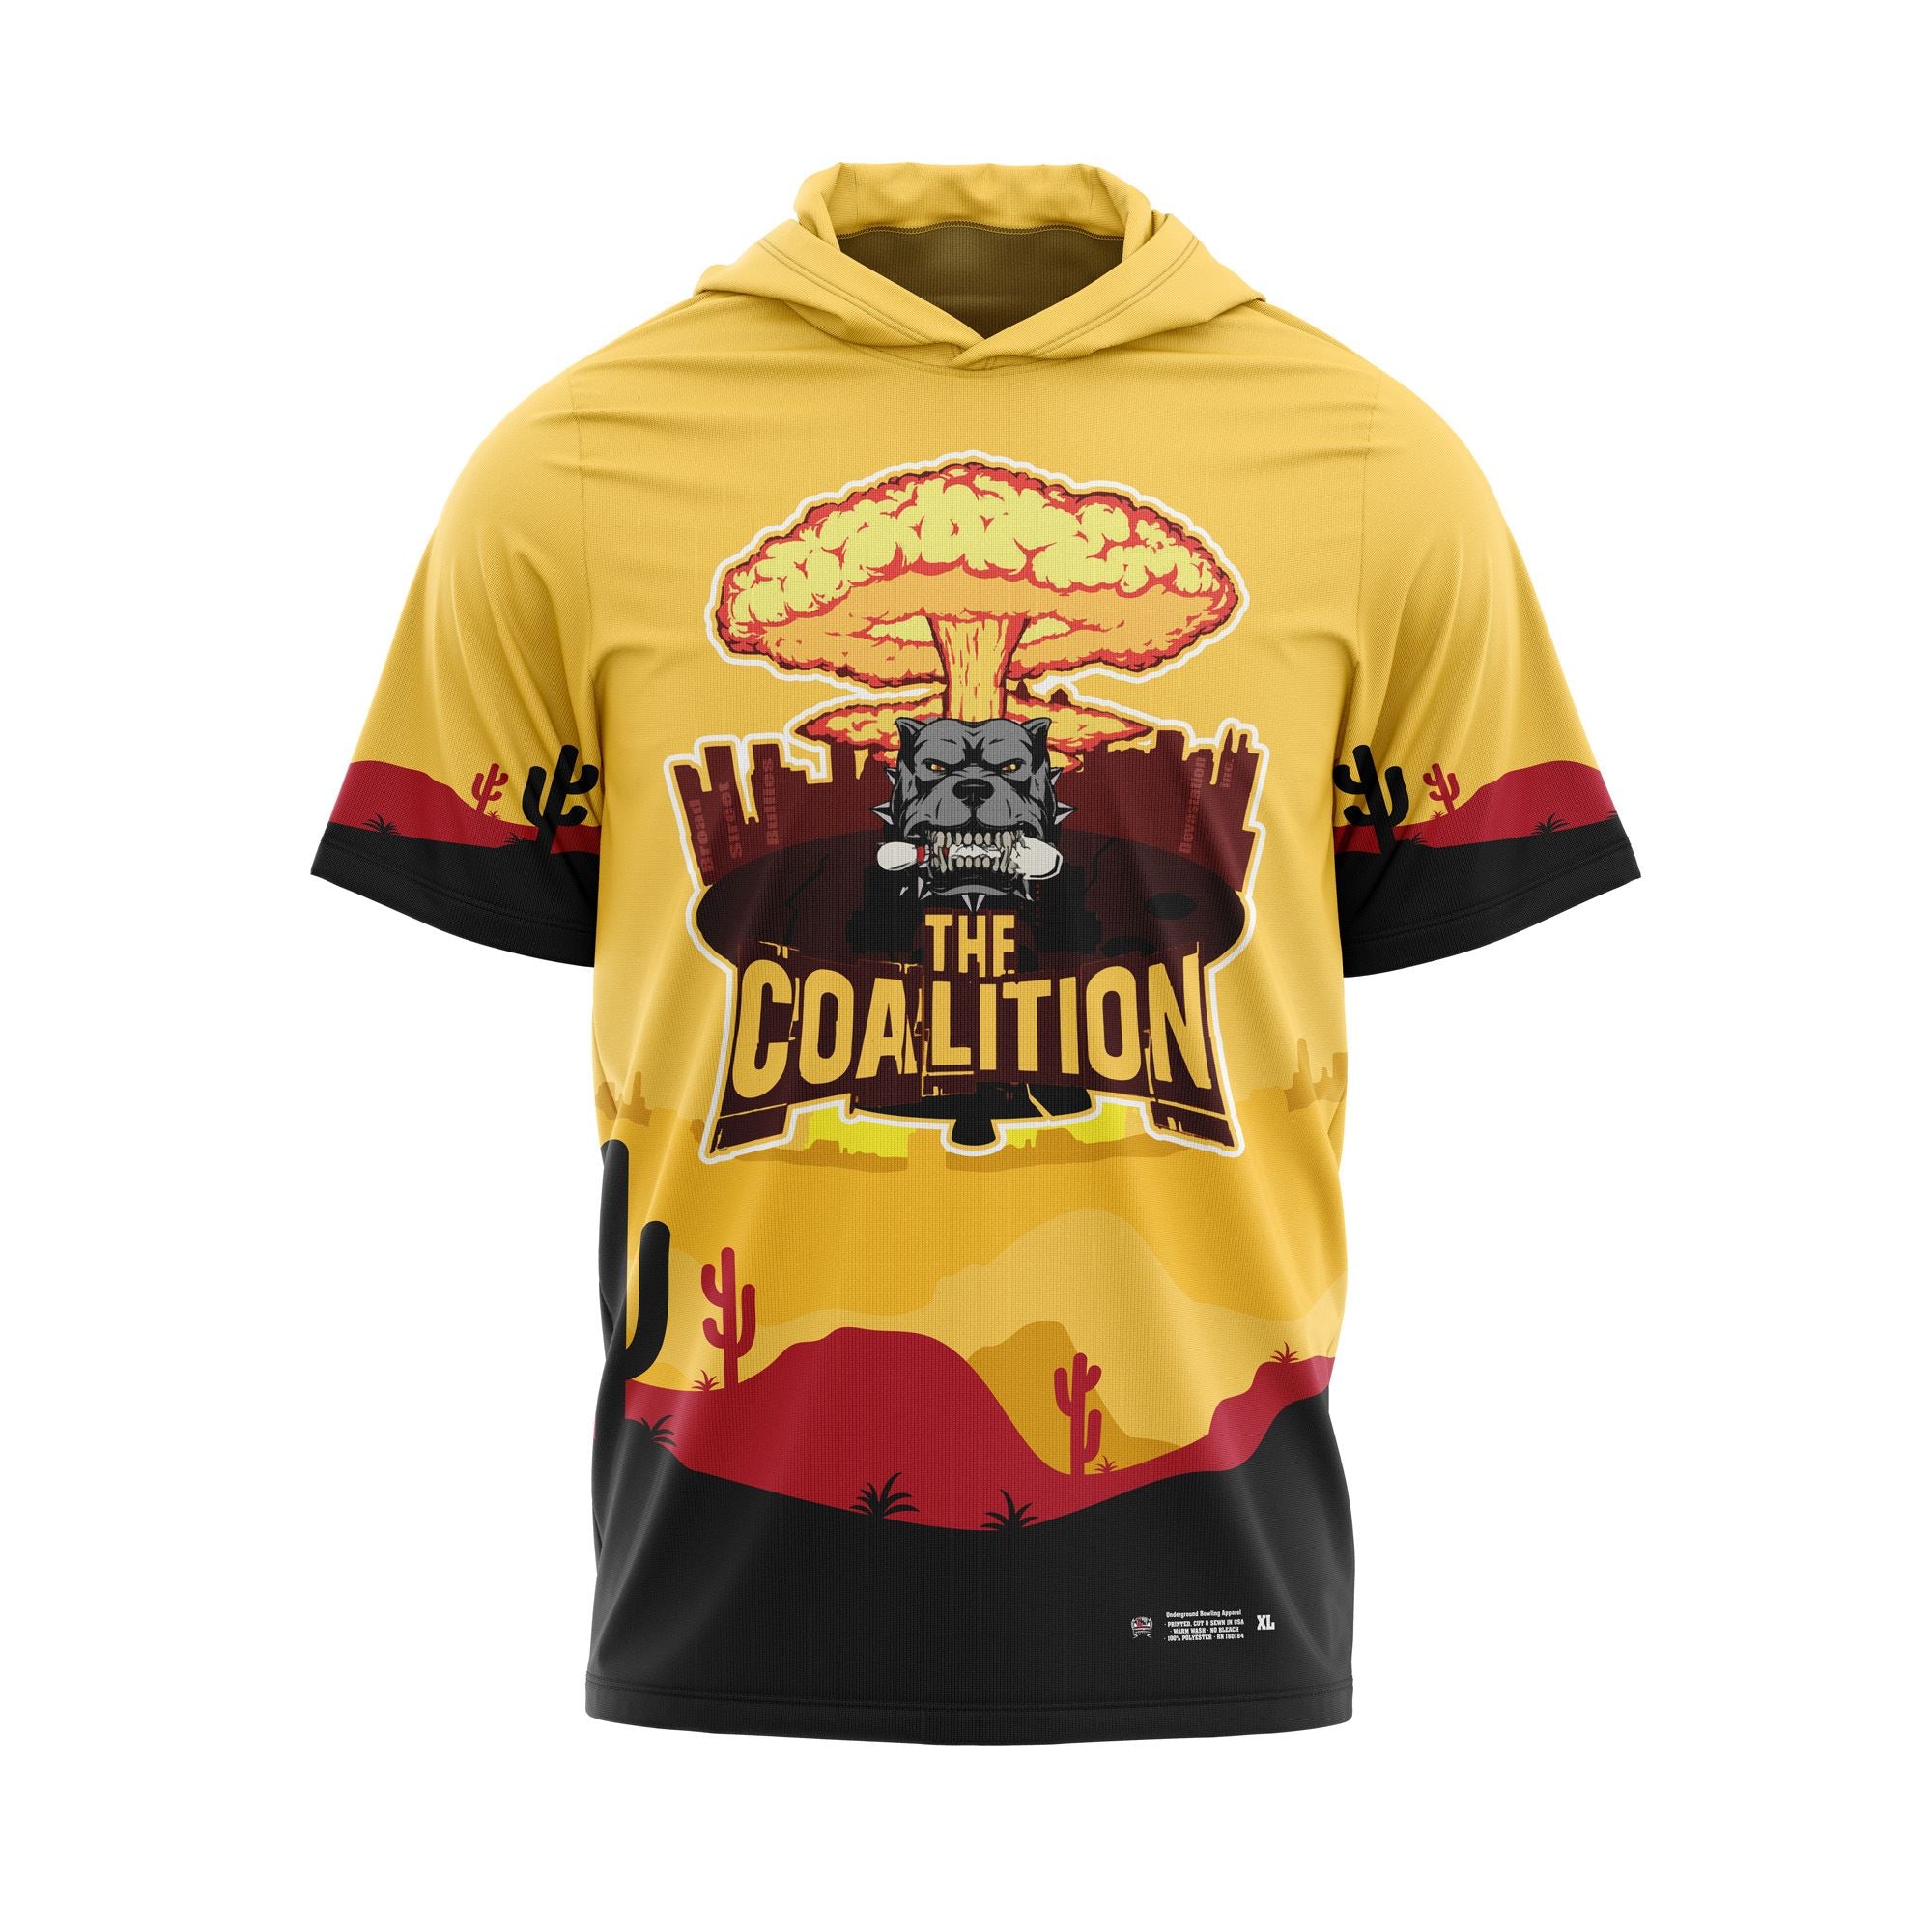 The Coalition Yellow Jersey